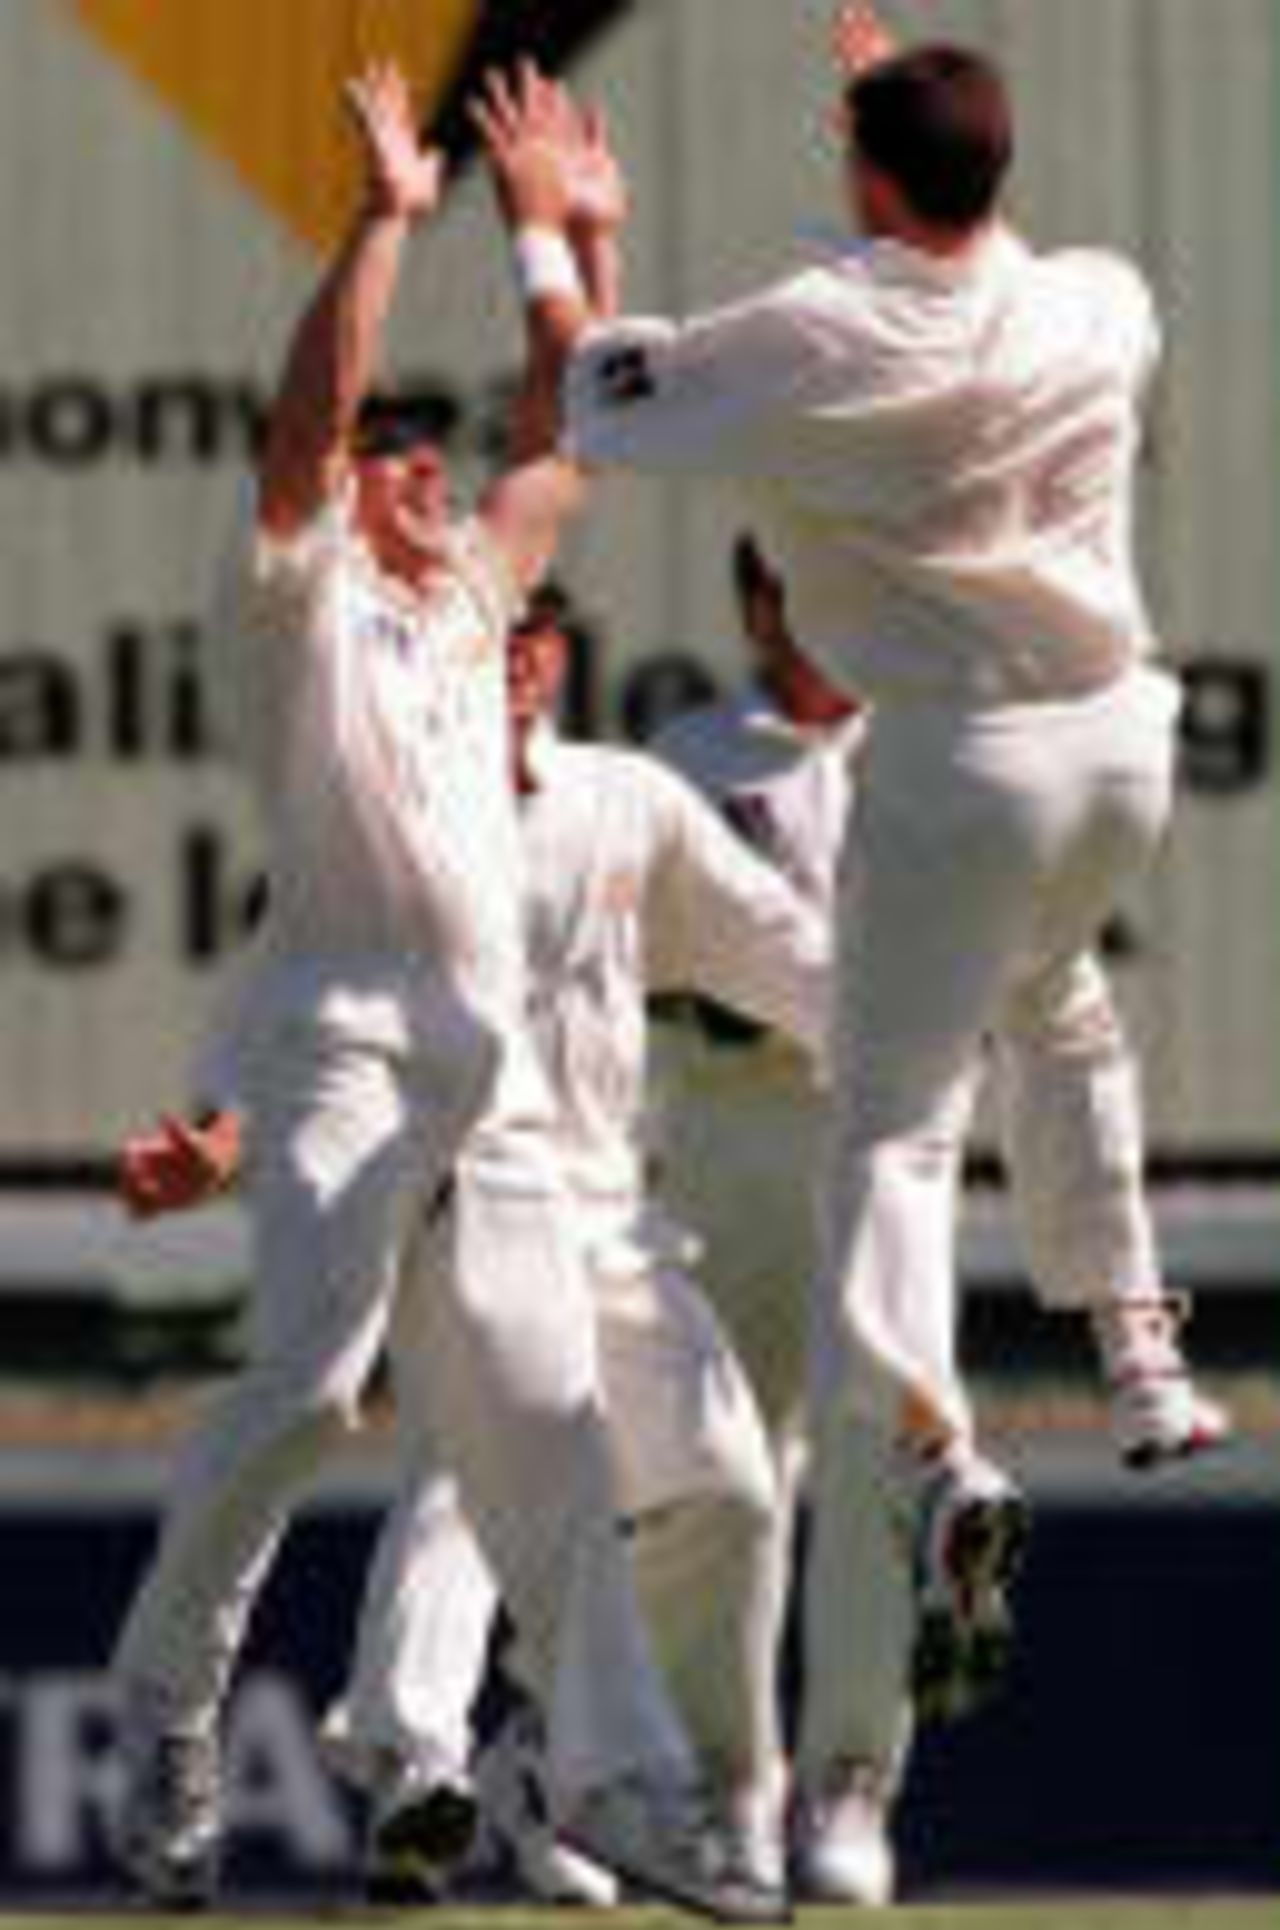 Fleming jumps in the air after taking the wicket of Stewart for 0  The Ashes 1998-99, 2nd Test at Perth, 29 Nov